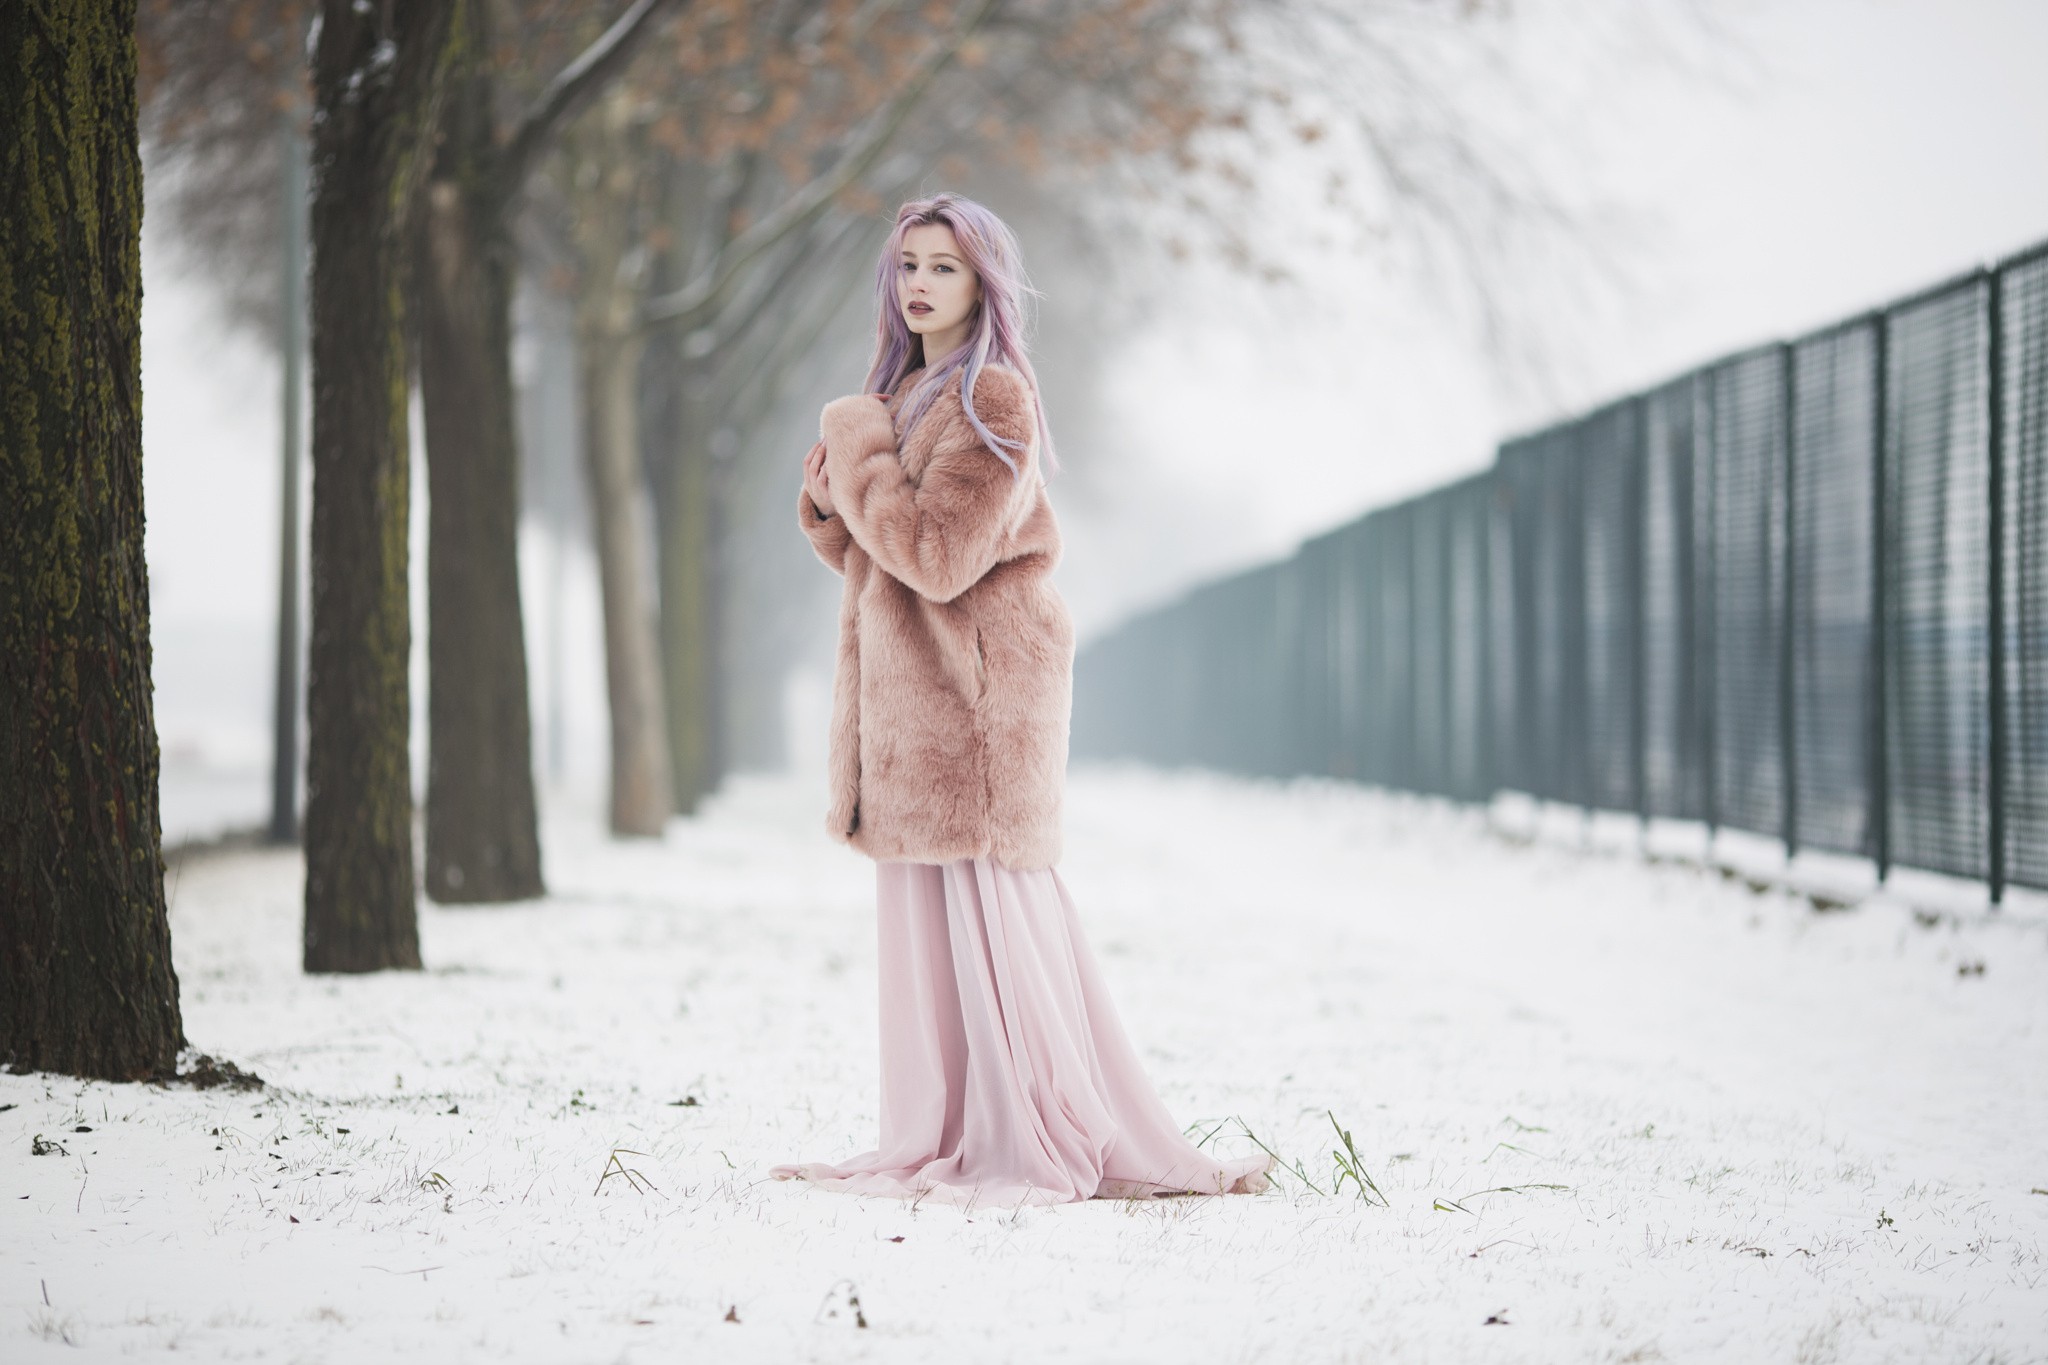 Winter Women Looking At Viewer Alone Pink Hair Blonde Snow Fur Coats Women Outdoors Classy Public Pi 2048x1365